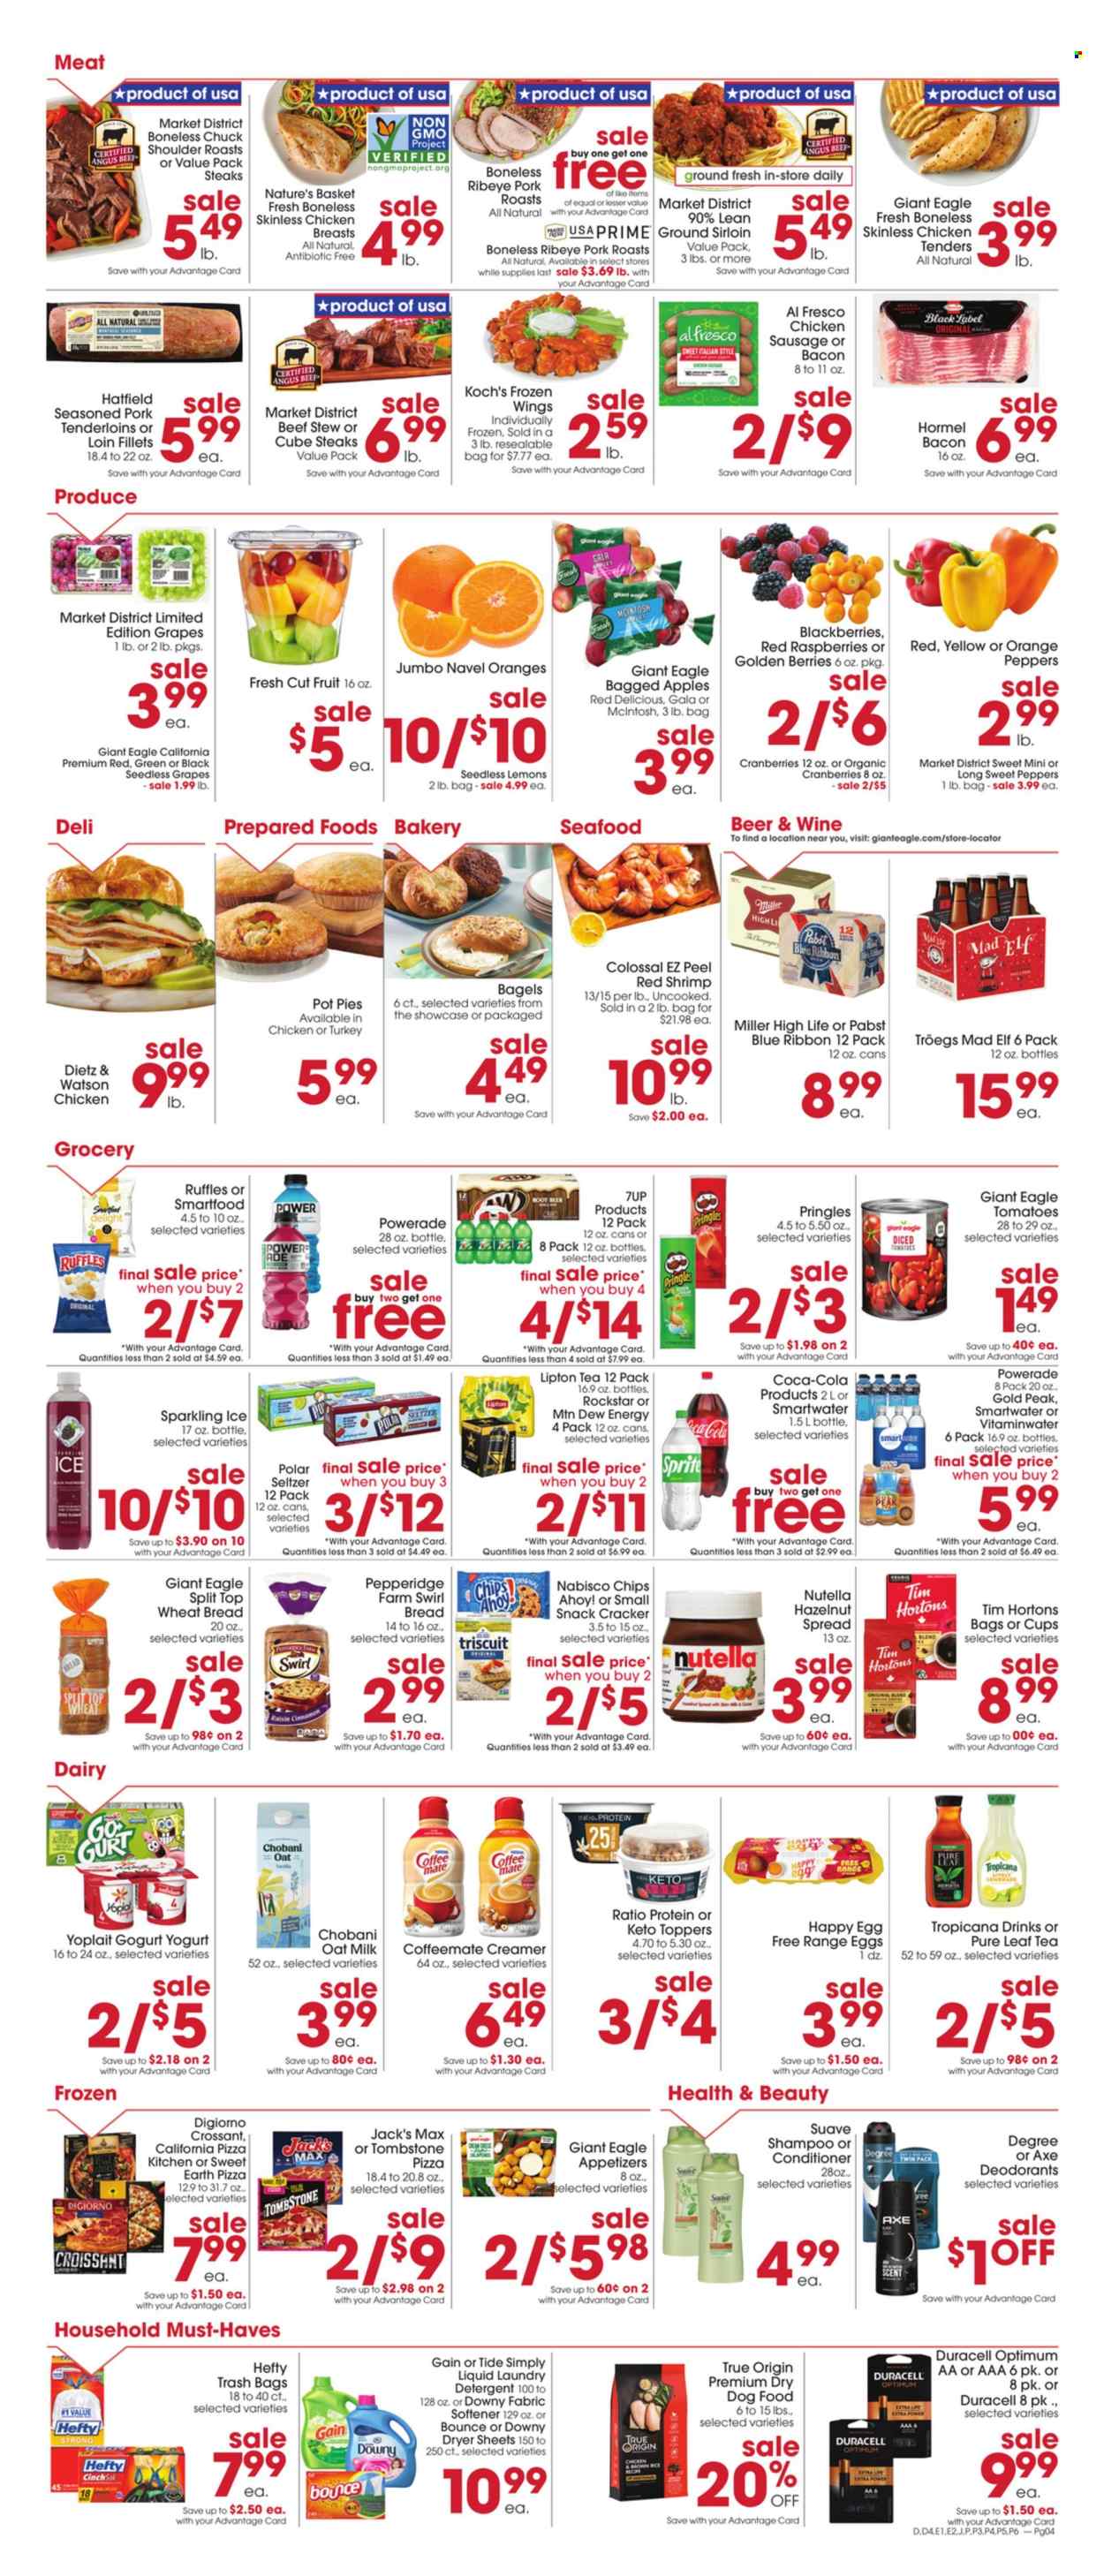 thumbnail - Giant Eagle Flyer - 11/24/2022 - 11/30/2022 - Sales products - wheat bread, croissant, pot pie, sweet peppers, apples, Gala, grapes, Red Delicious apples, seedless grapes, oranges, seafood, shrimps, pizza, chicken tenders, Hormel, bacon, Dietz & Watson, sausage, chicken sausage, yoghurt, Yoplait, Chobani, Coffee-Mate, milk, oat milk, eggs, creamer, Nutella, snack, crackers, Chips Ahoy!, Pringles, Smartfood, Ruffles, cranberries, diced tomatoes, brown rice, rice, cinnamon, hazelnut spread, Coca-Cola, Mountain Dew, Sprite, Powerade, Lipton, 7UP, Rockstar, seltzer water, Smartwater, tea, Pure Leaf, L'Or, wine, beer, Miller, Pabst Blue Ribbon, beef meat, steak, pork tenderloin, detergent, Gain, Tide, fabric softener, laundry detergent, dryer sheets, Downy Laundry, shampoo, Suave, conditioner, deodorant, Axe, Hefty, trash bags, basket, cup, Duracell, animal food, dry dog food, dog food, Optimum, lemons, navel oranges. Page 2.